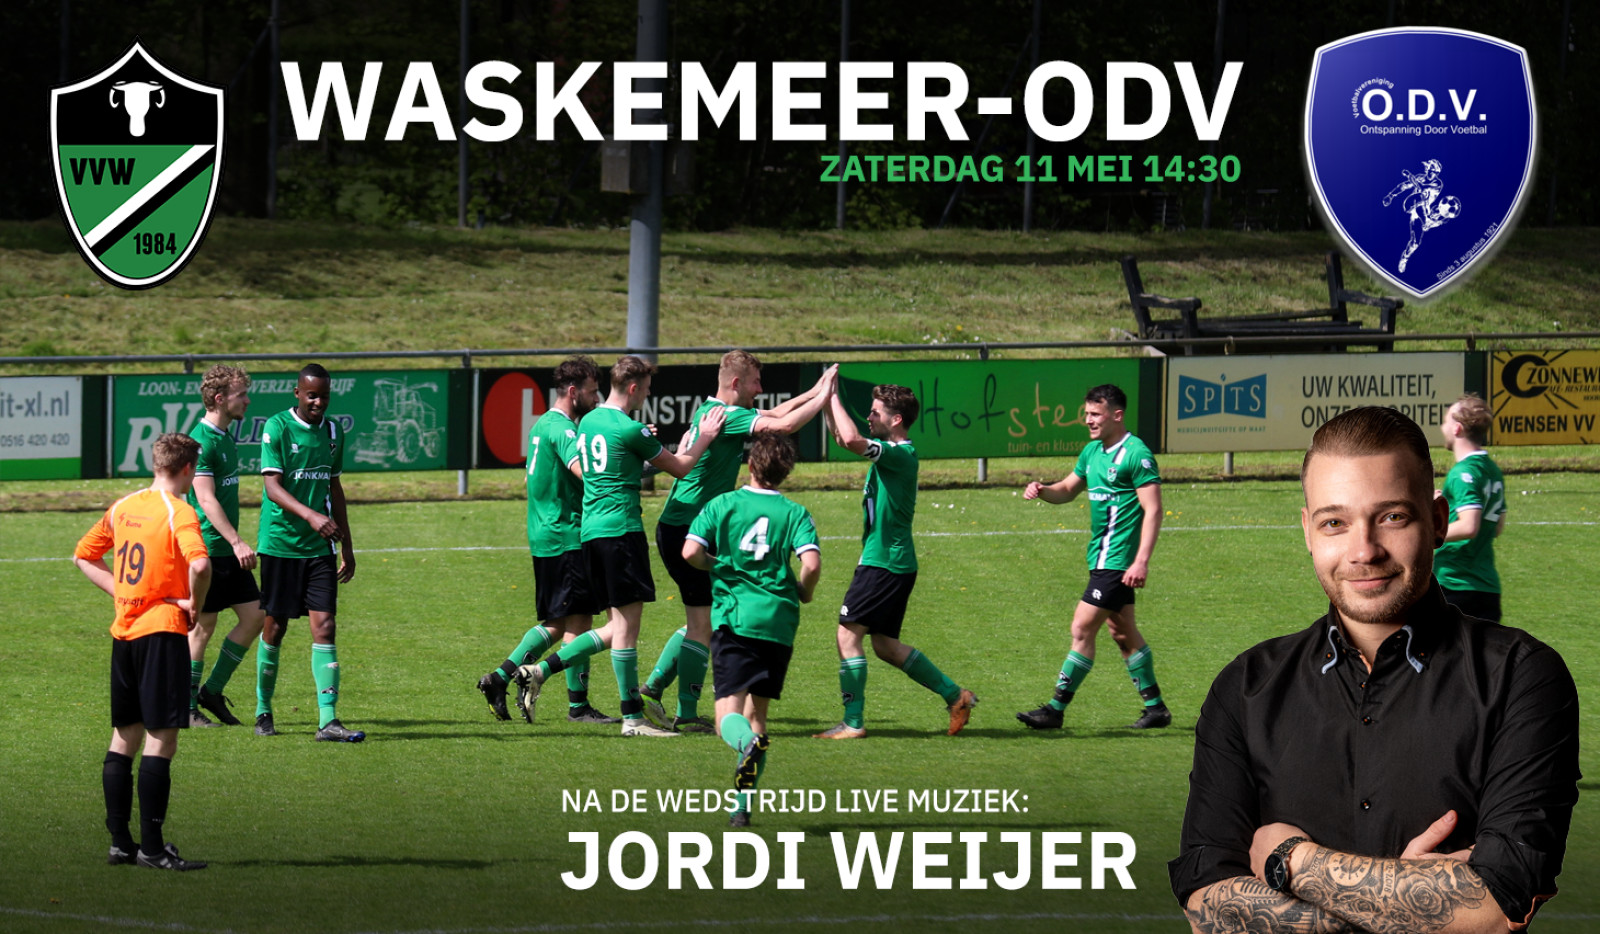 Derby day: Waskemeer - ODV